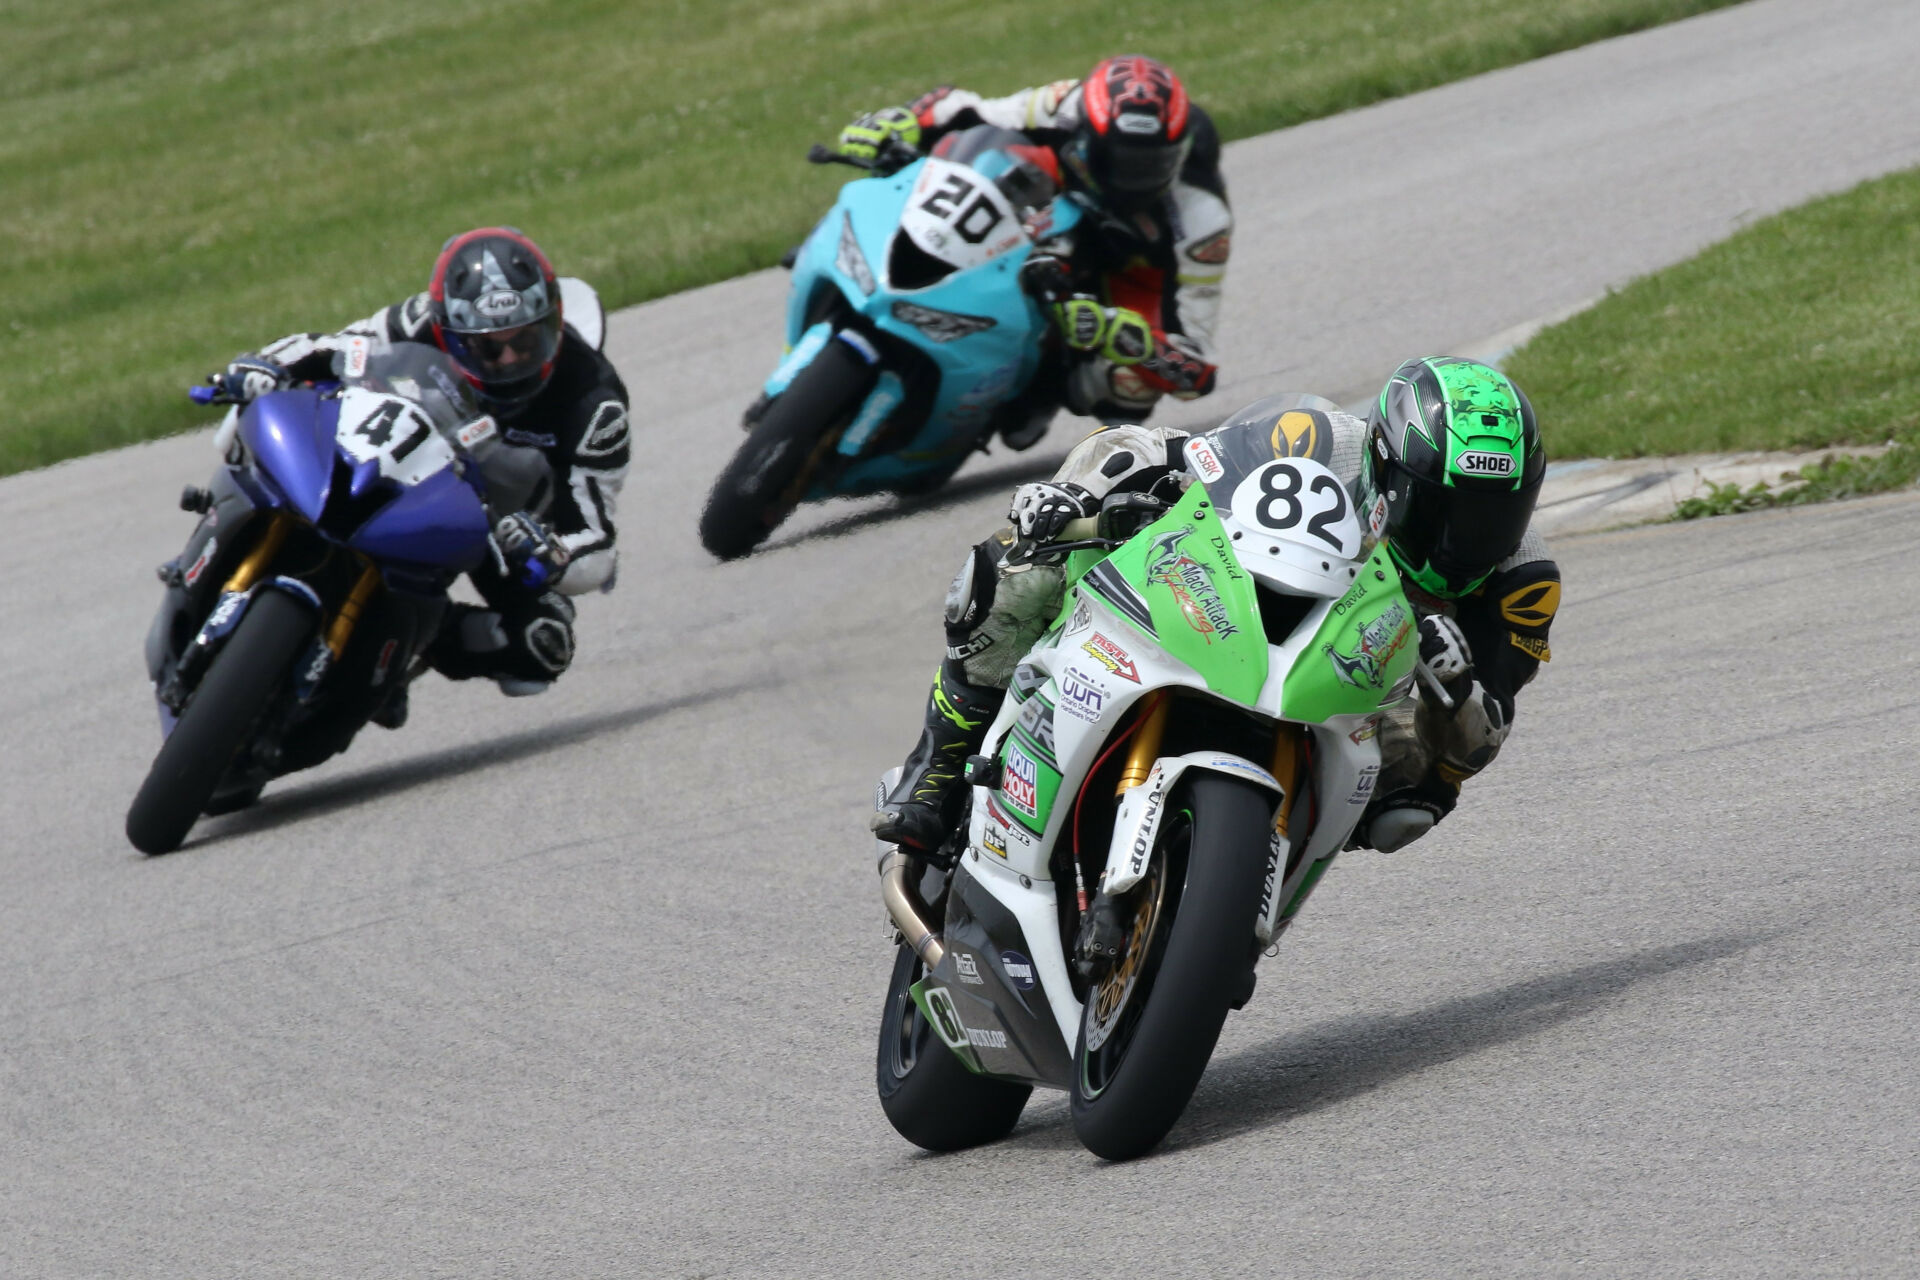 Trevor Dion (20) leads the Canadian Pro Sport Bike Championship heading into CSBK Round 2 this weekend at Calabogie Motorsports Park. Dion took a win and a third-place finish at the opening round of the season, as shown here. David MacKay (82) and Will Hornblower (47) sit third and fourth, respectively, in the standings. Photo by Rob O'Brien, courtesy CSBK/PMP.